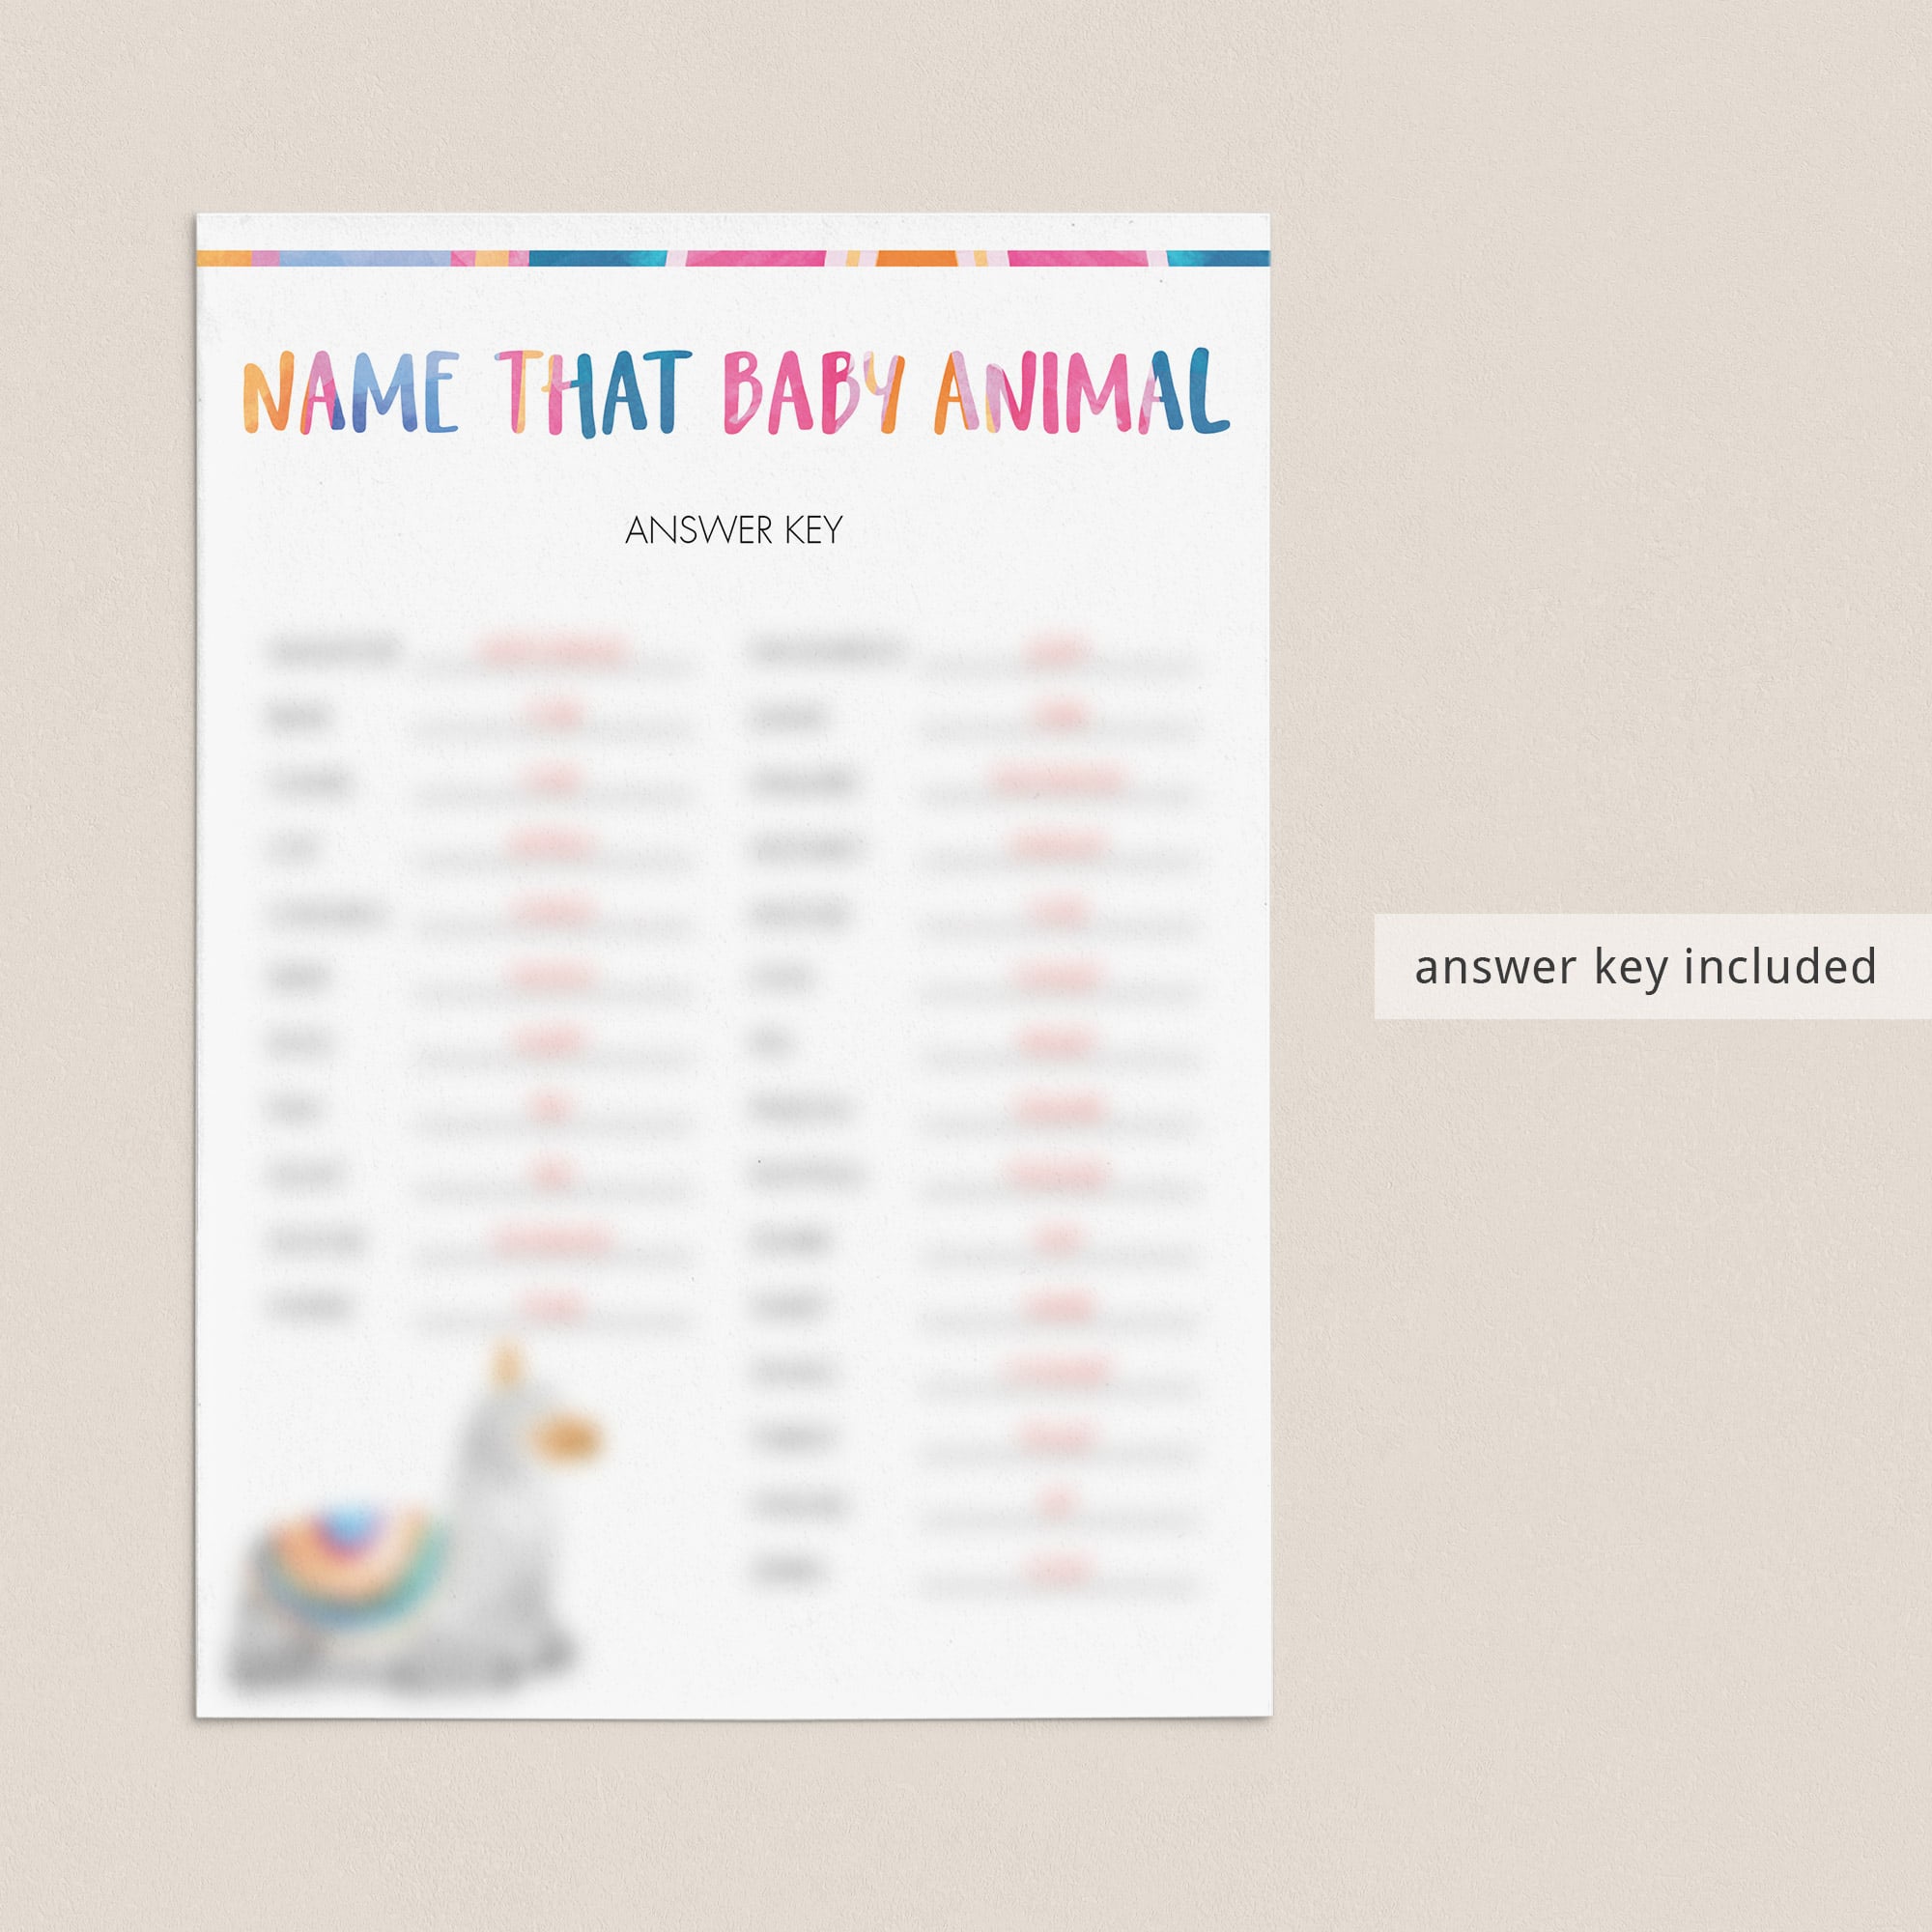 name that baby animal quiz anwers by LittleSizzle